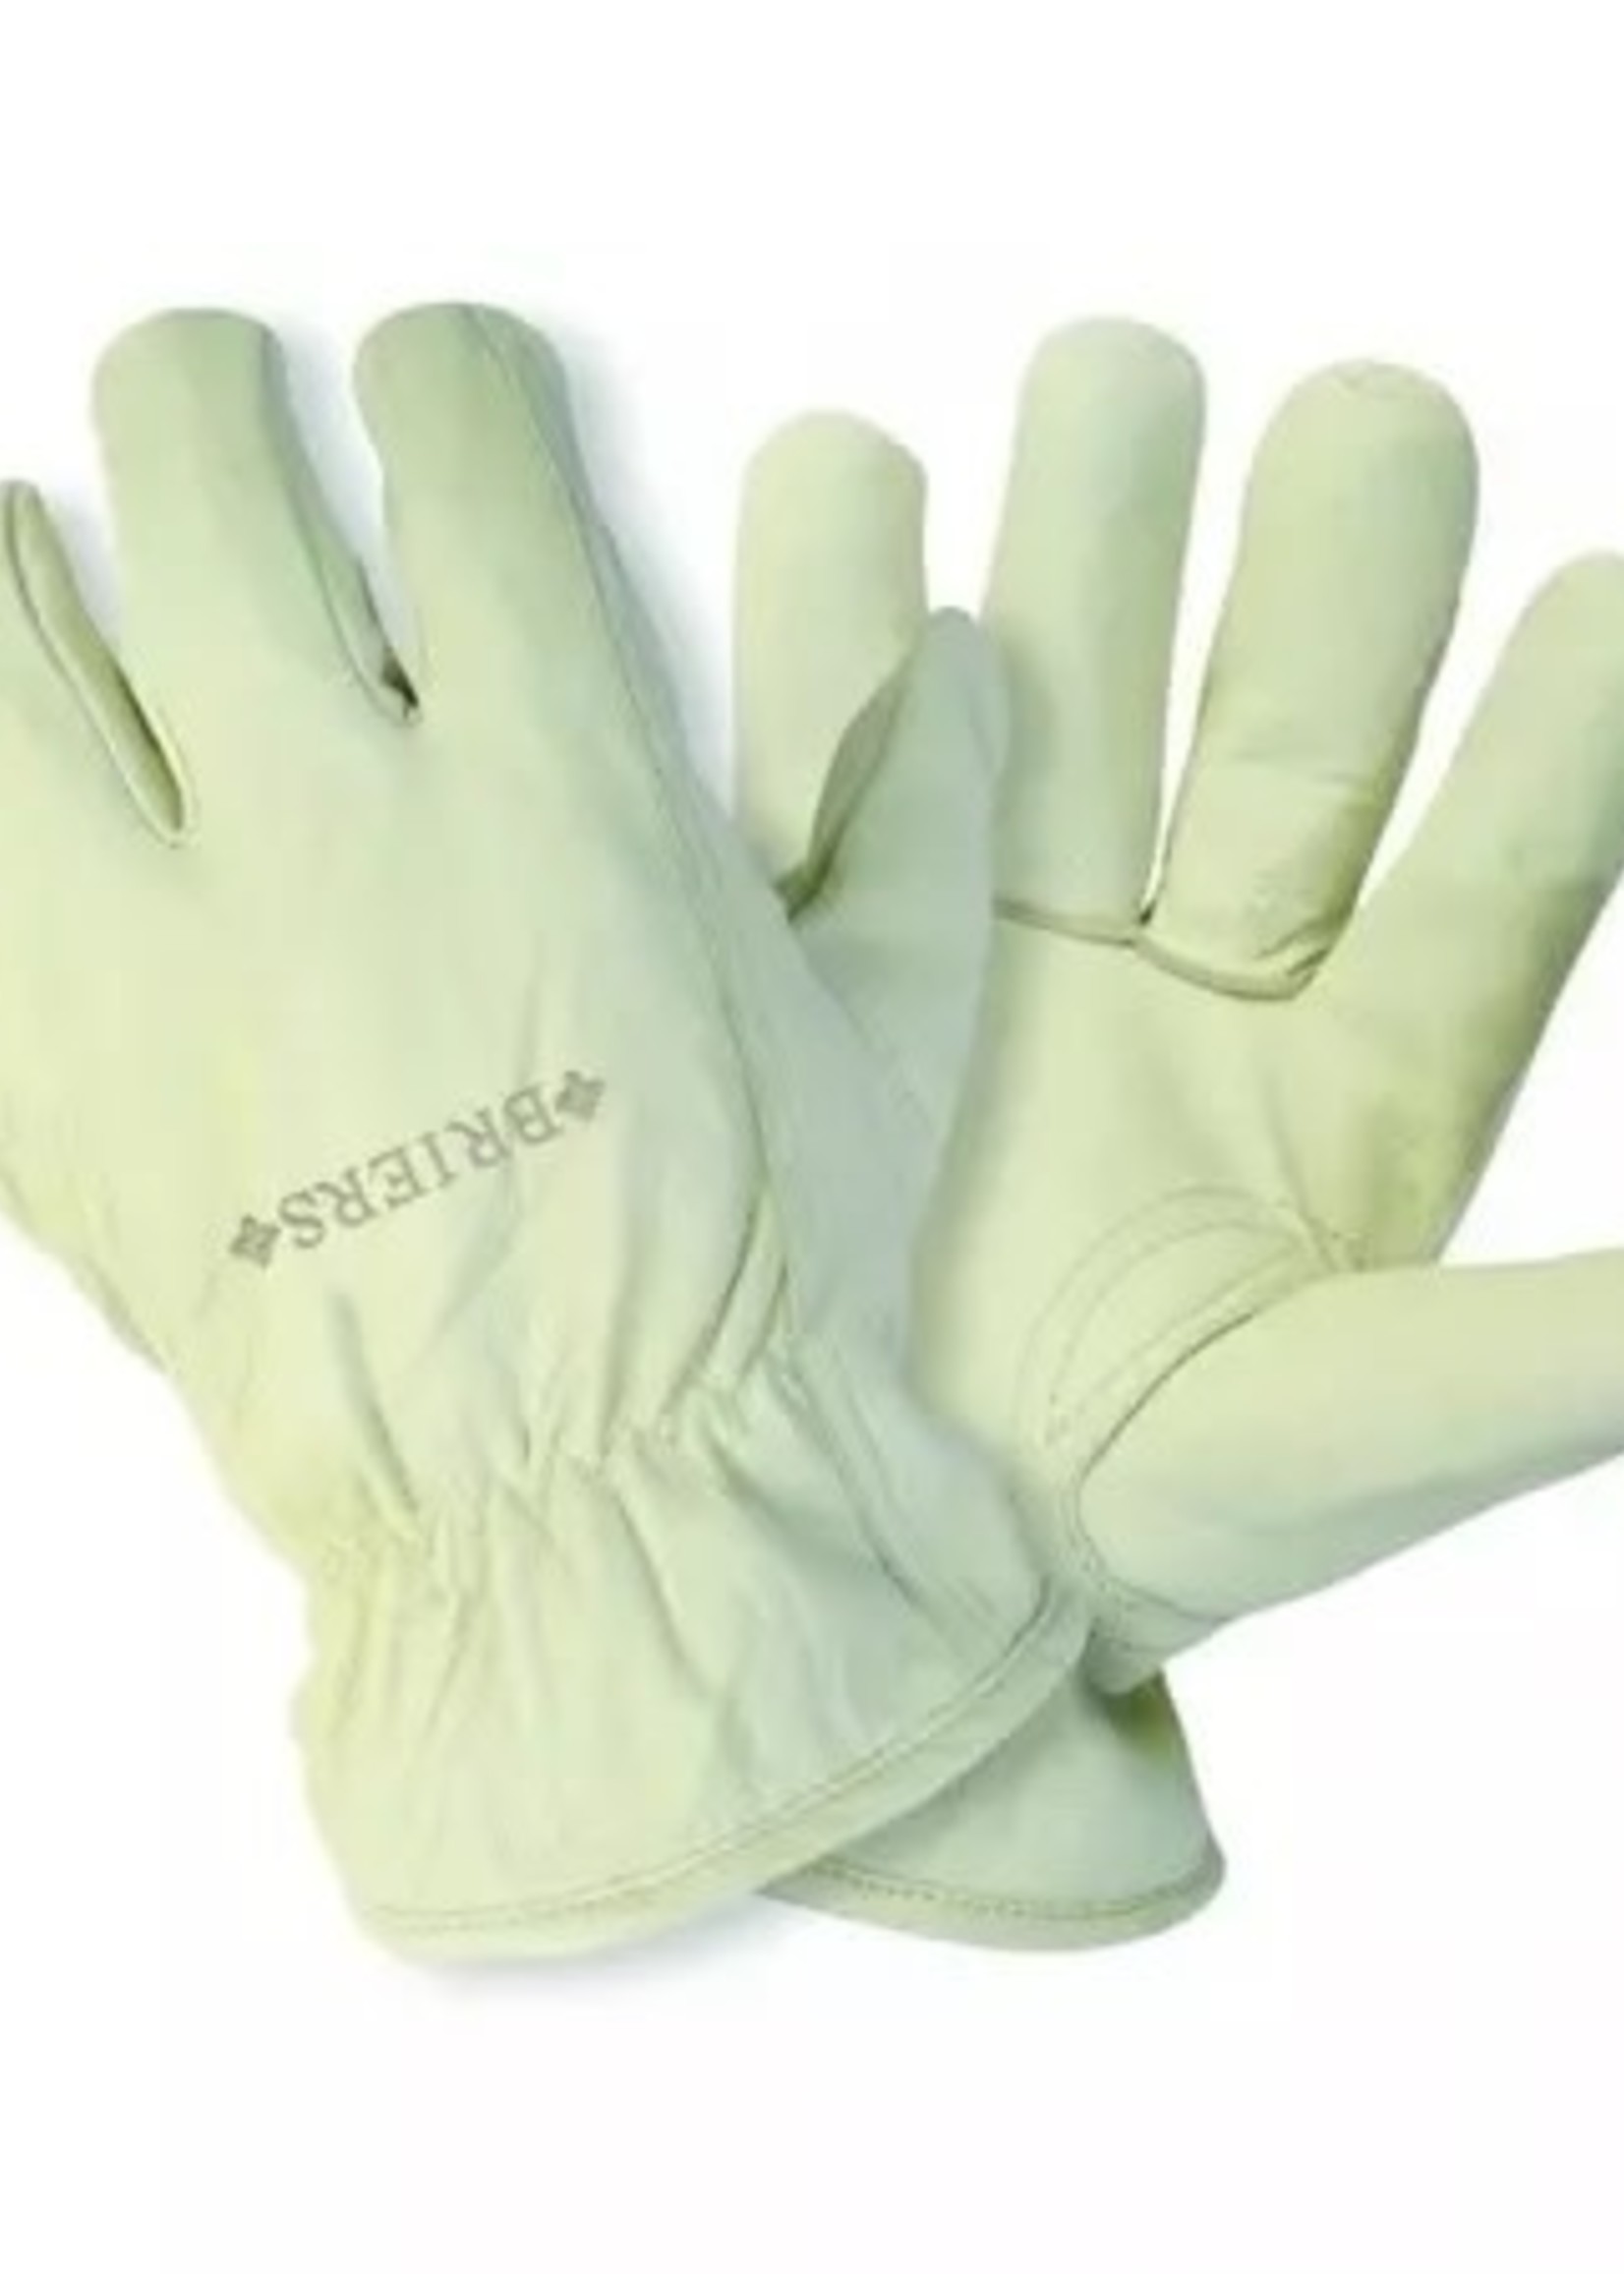 Ultimate Lined Leather Cream Gloves - Size 8 Medium